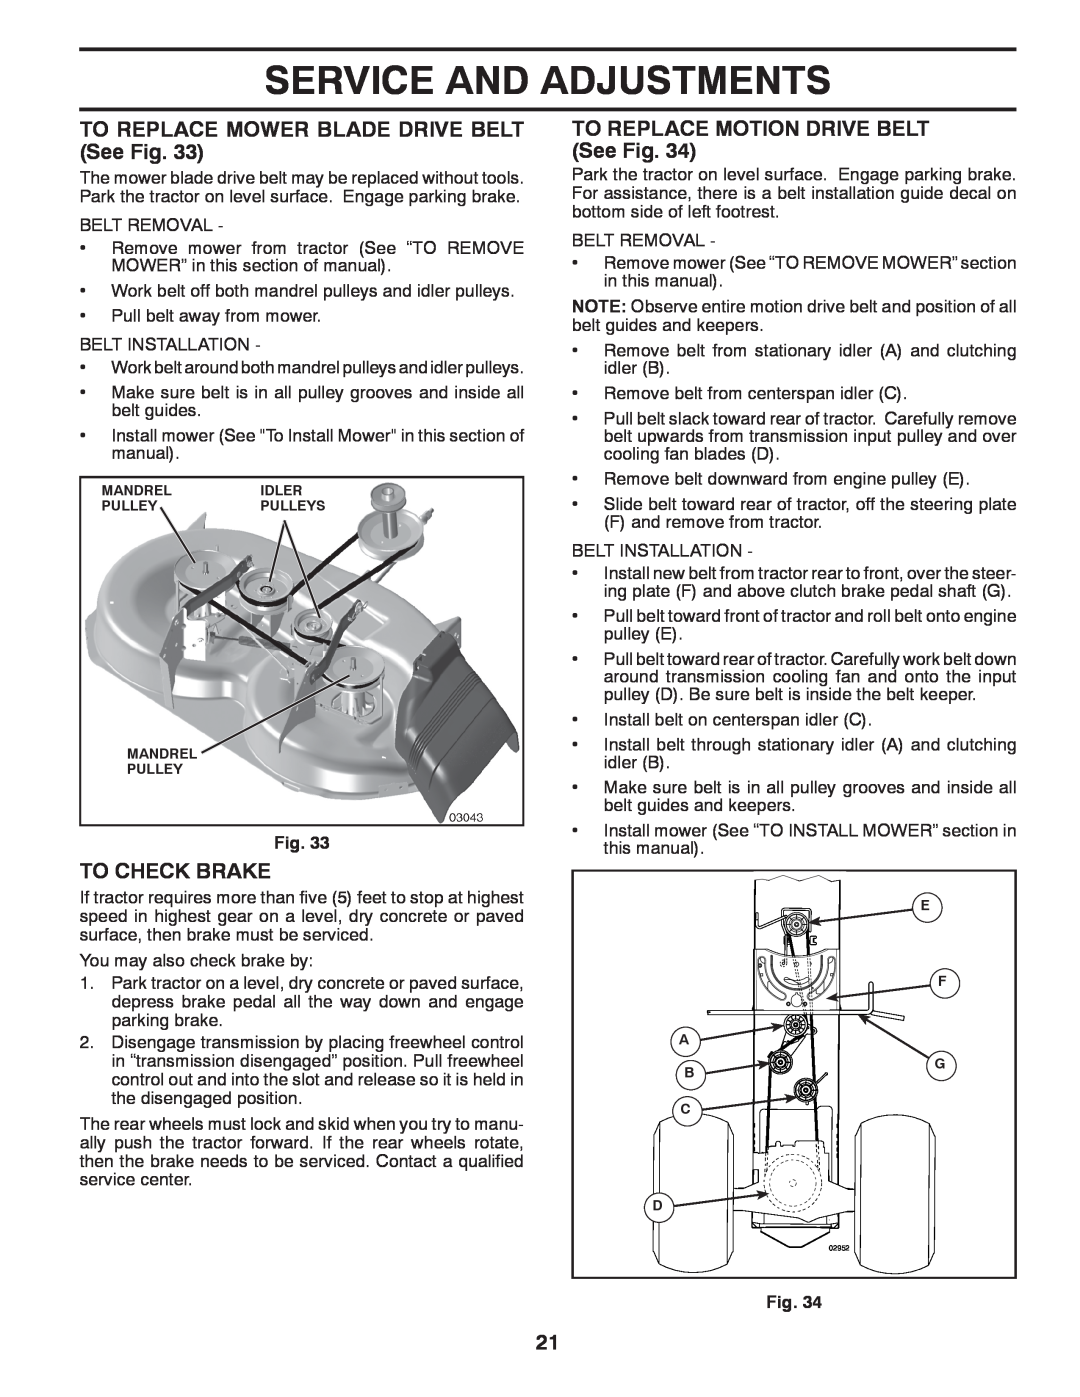 Poulan 96048001800 manual TO REPLACE MOWER BLADE DRIVE BELT See Fig, To Check Brake, TO REPLACE MOTION DRIVE BELT See Fig 